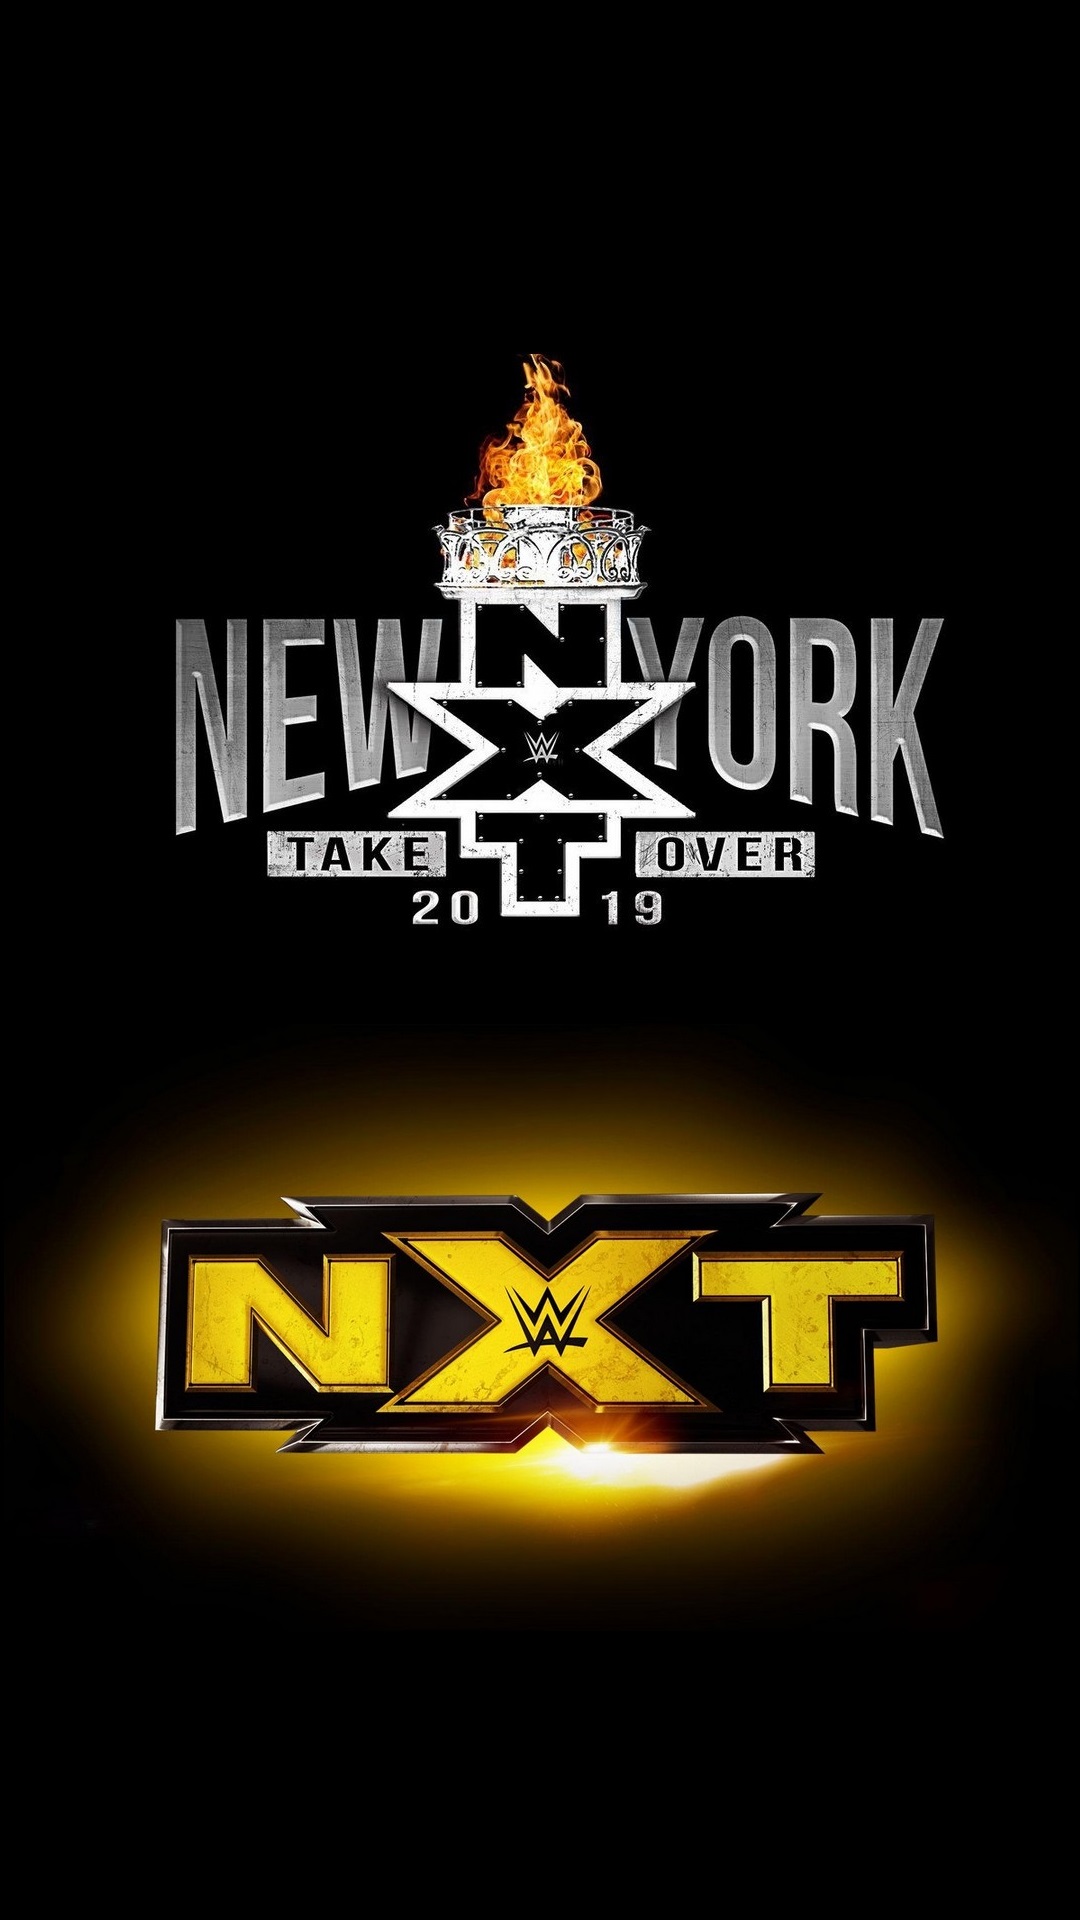 NXT Takeover New York Phone Wallpaper with high-resolution 1080x1920 pixel. Download all Mobile Wallpapers and Use them as wallpapers for your iPhone, Tablet, iPad, Android and other mobile devices